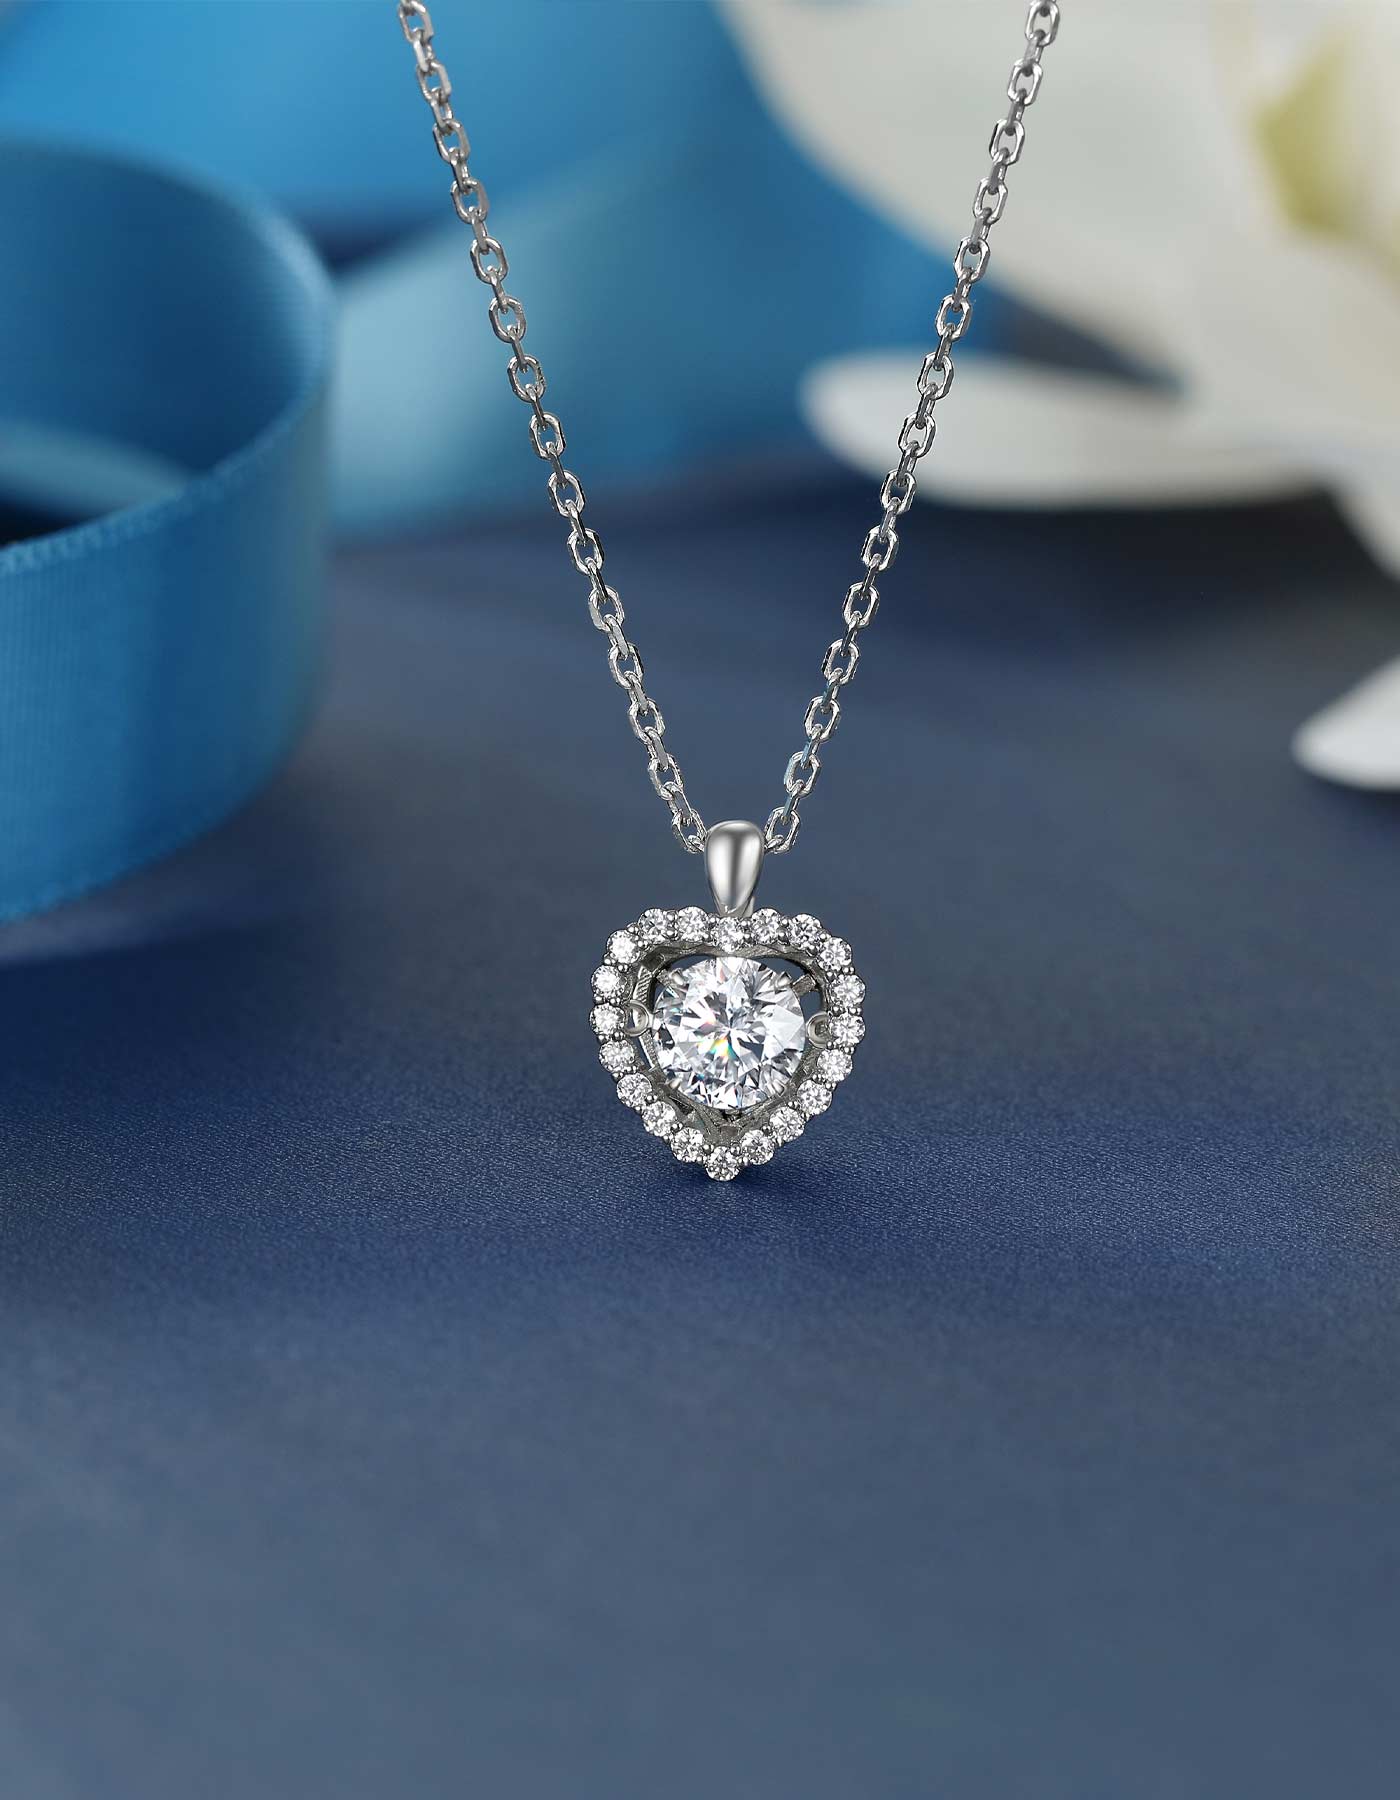 MomentWish Moissanite Dancing Necklace